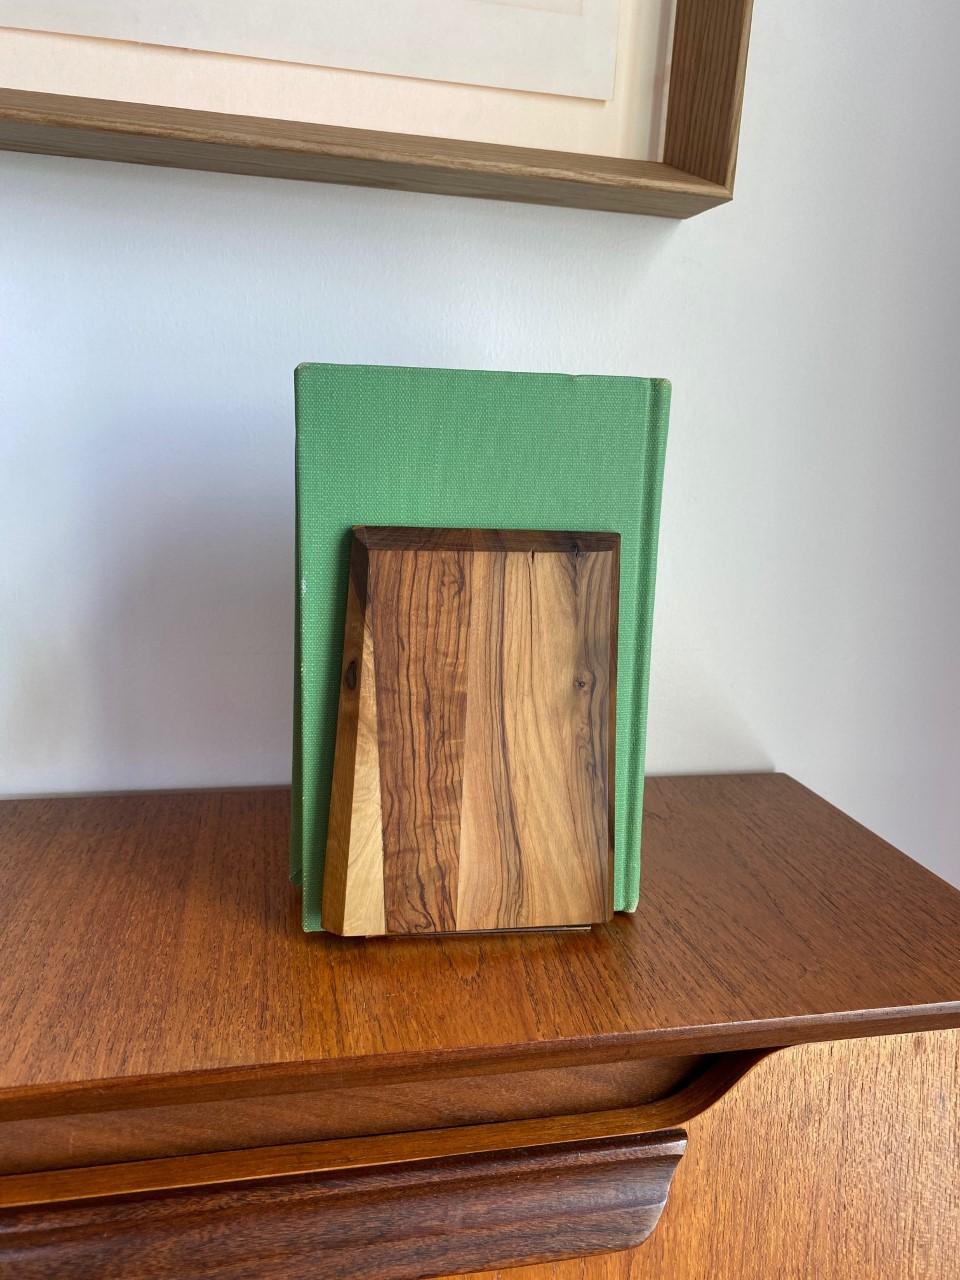 Unique and simply exceptional pair of vintage bookends. Deriving on the uniqueness of the wood grain, these bookends are elegant and modernist. Simple lines contrast with organic patterns in the wood creating a balance of nature and form. Elegant